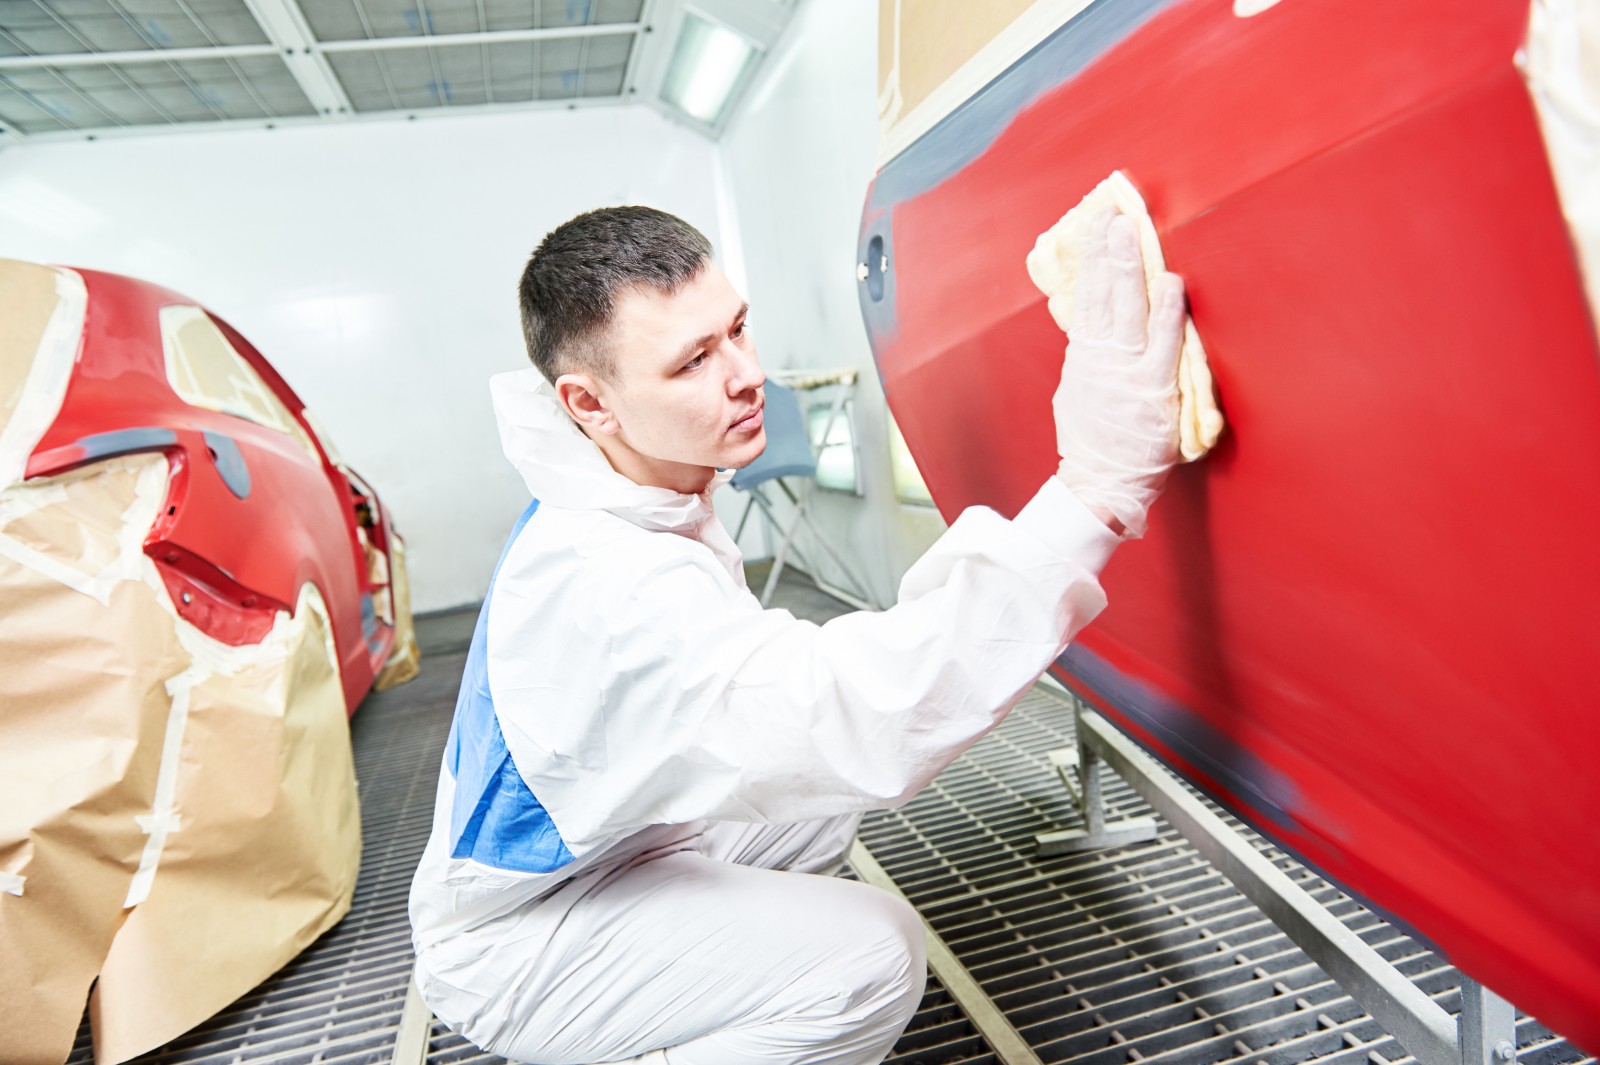 Young male paint finisher in overalls working on a red car door. The rest of the car is visible in the background